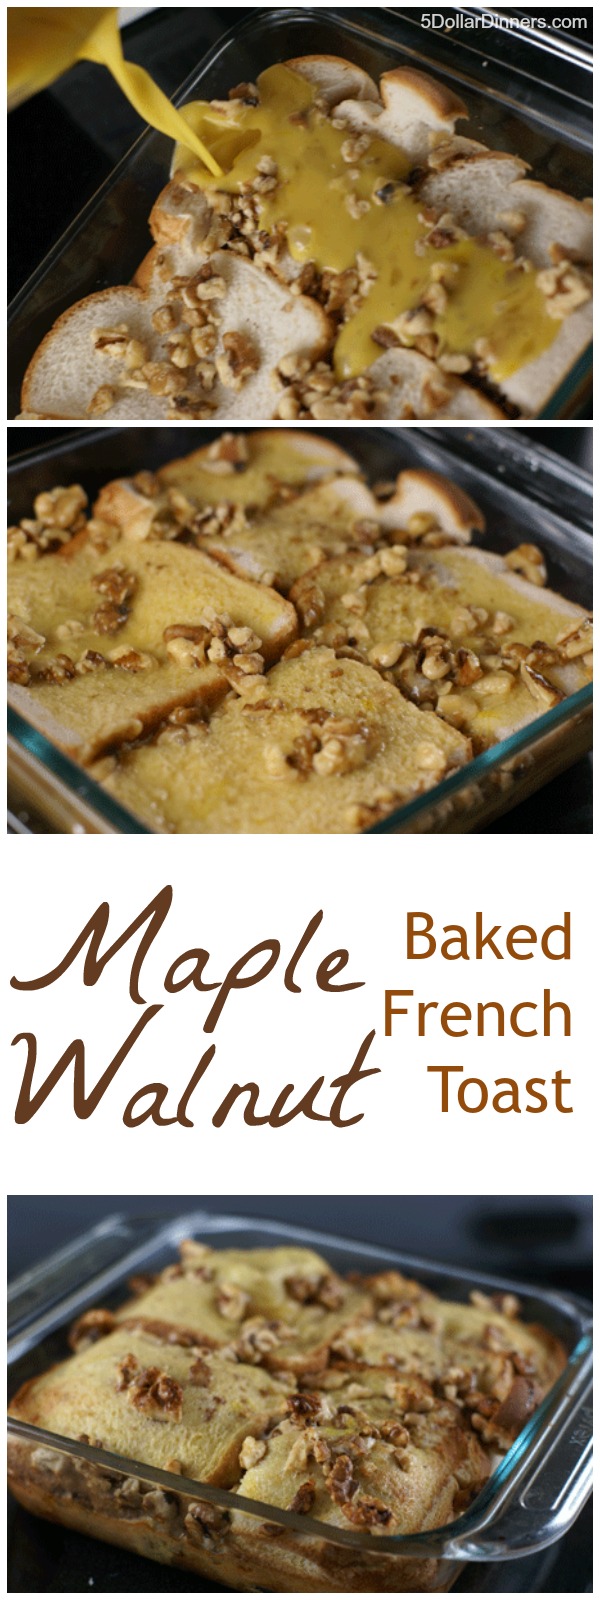 Maple Walnut Baked French Toast - $5 Dinners